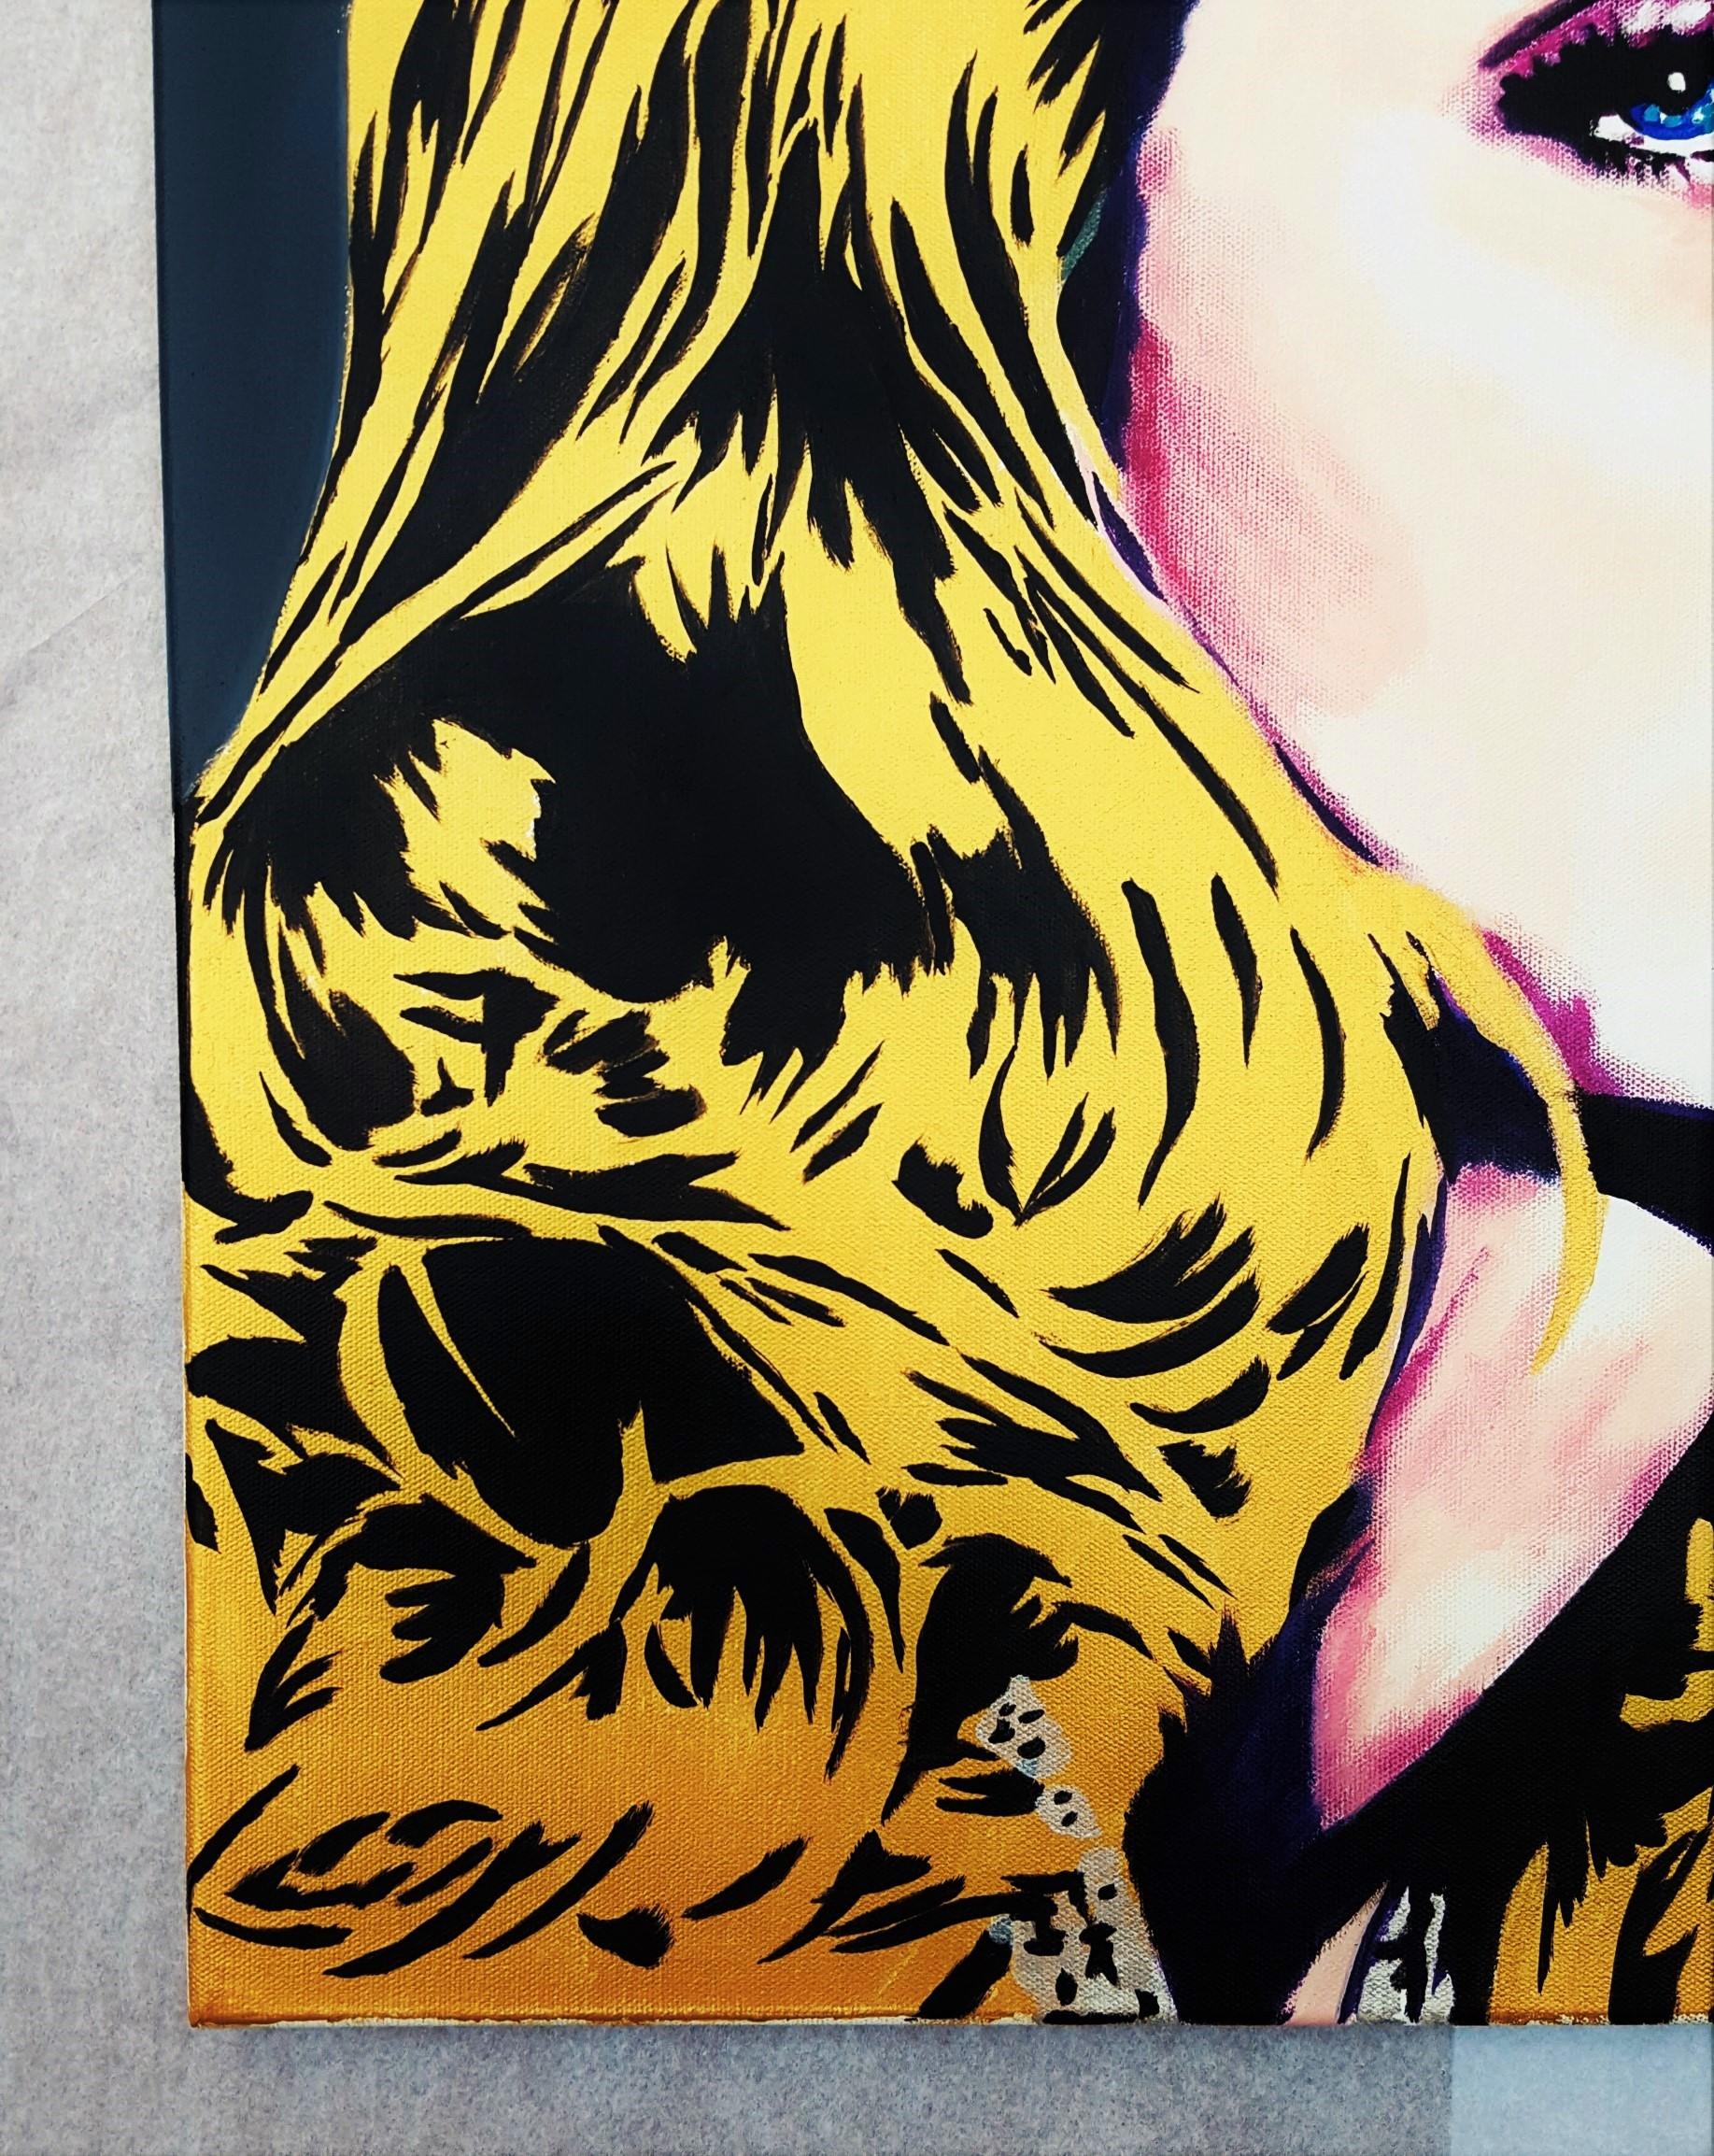 Rosie Huntington-Whiteley Icon IV /// Contemporary Pop Art Fashion Model  - Painting by Jack Graves III